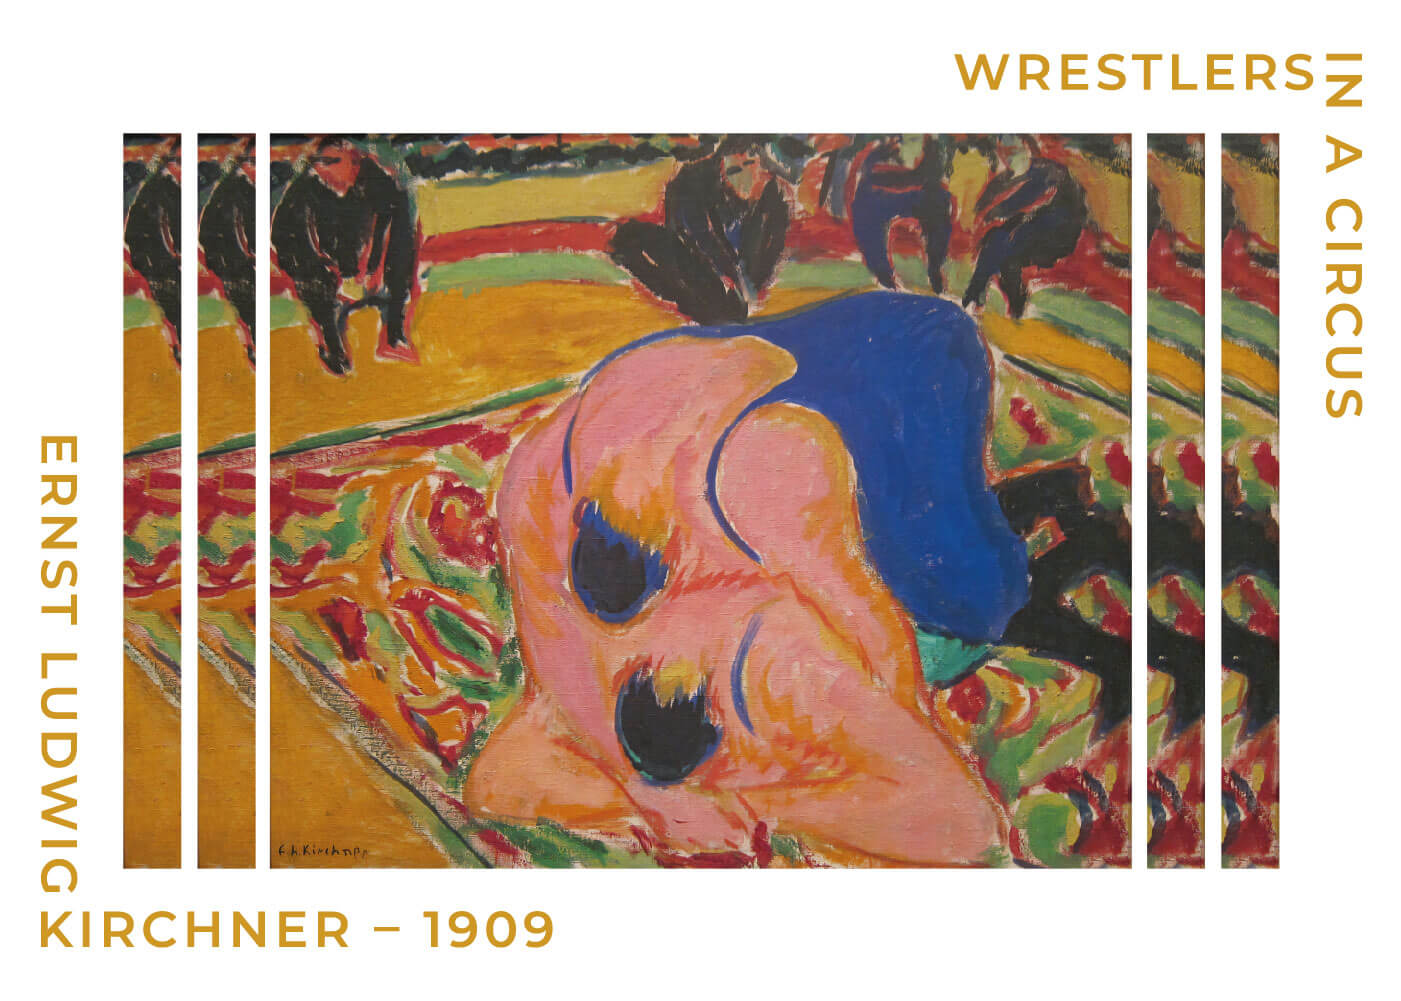 Wrestlers in a circus - Ernst L. Kirchner museumsplakat